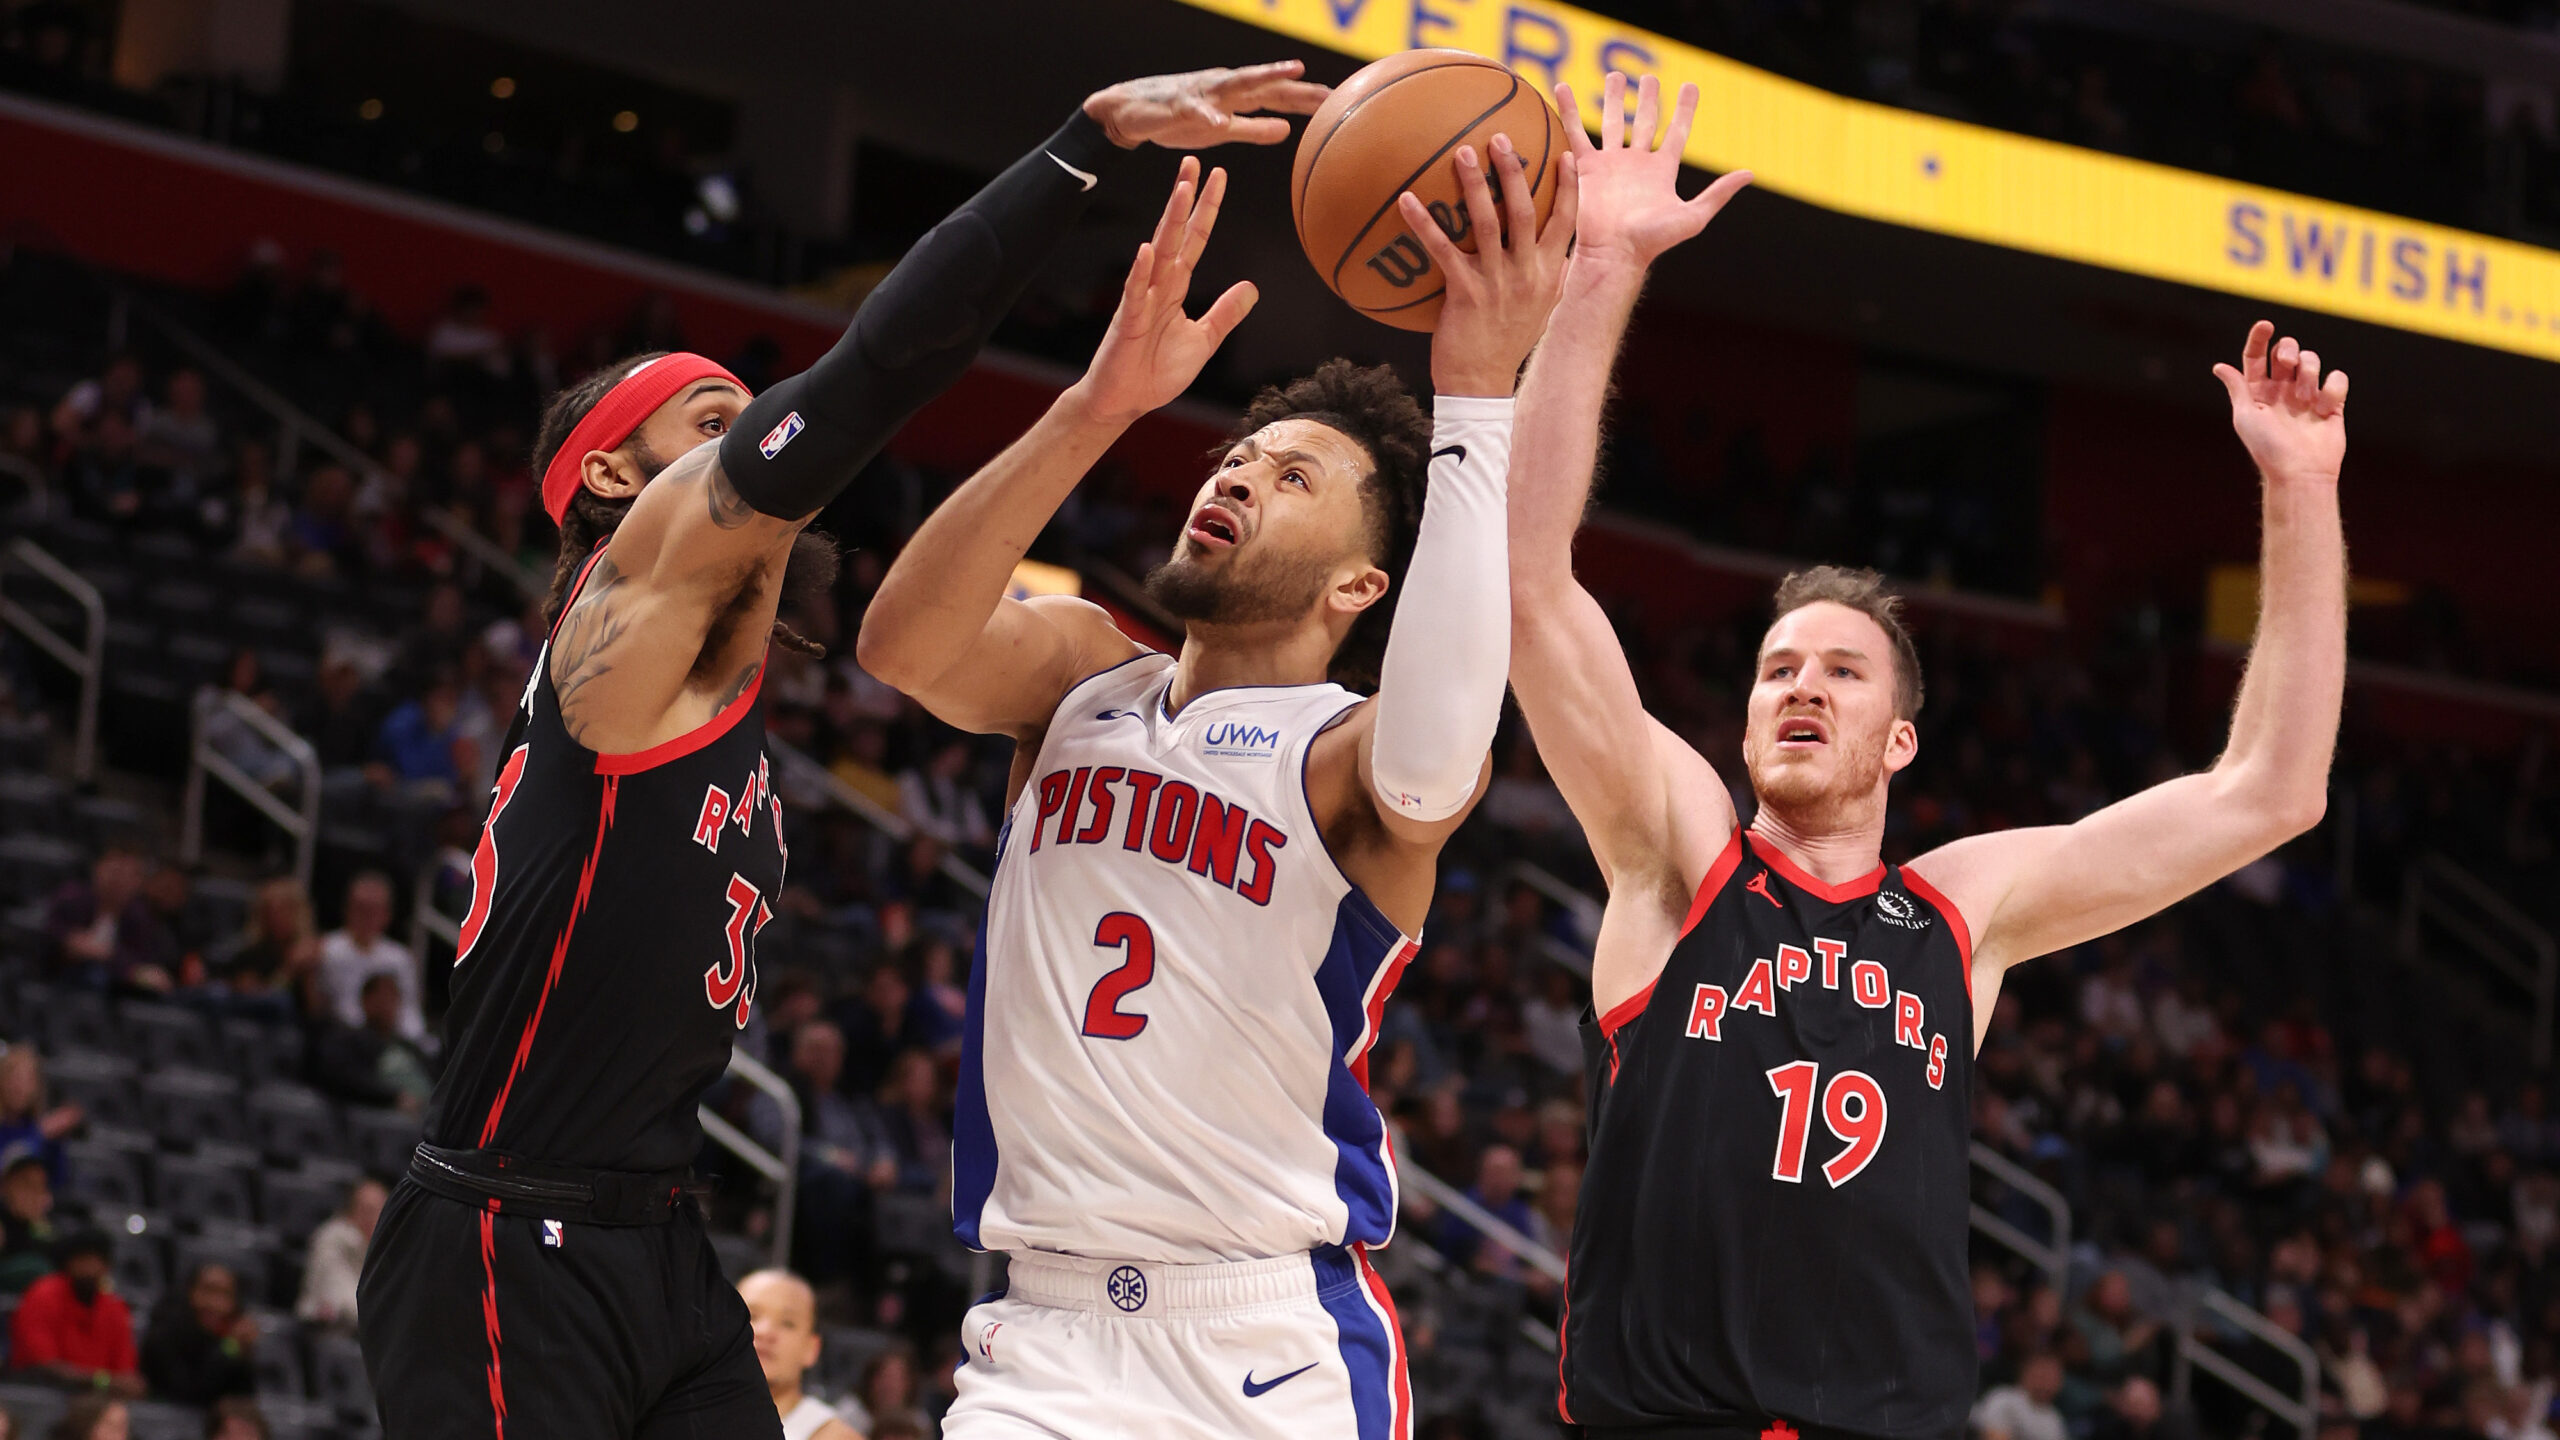 Cade Cunningham #2 of the Detroit Pistons drives to the basket between Gary Trent Jr. #33 and Jakob Poeltl #19 of the